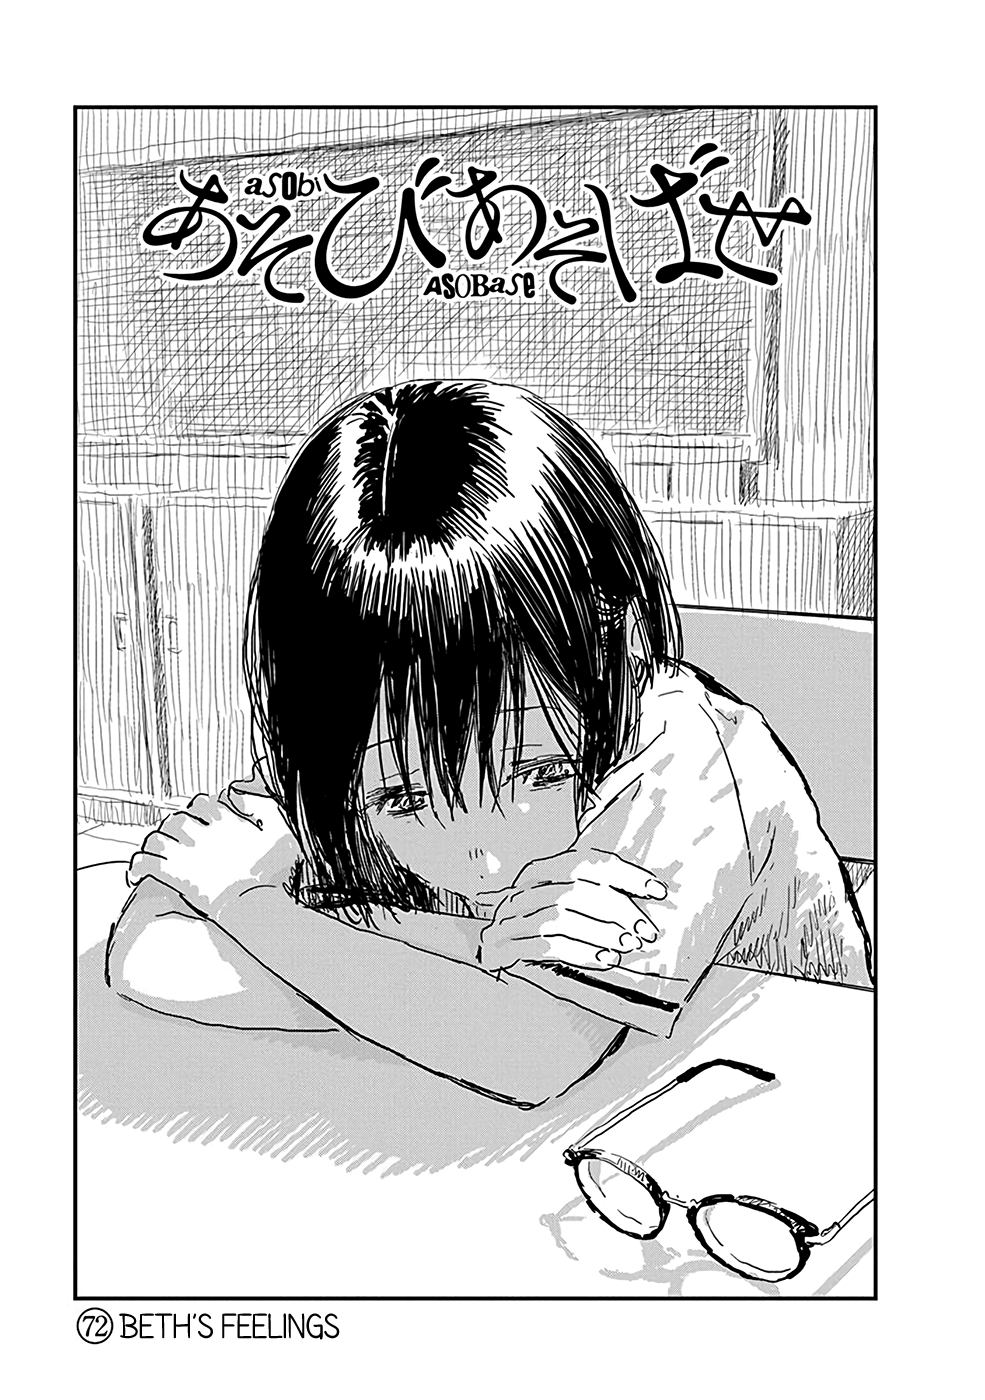 Asobi Asobase Vol.8 Chapter 72: Beth's Feelings - Picture 1